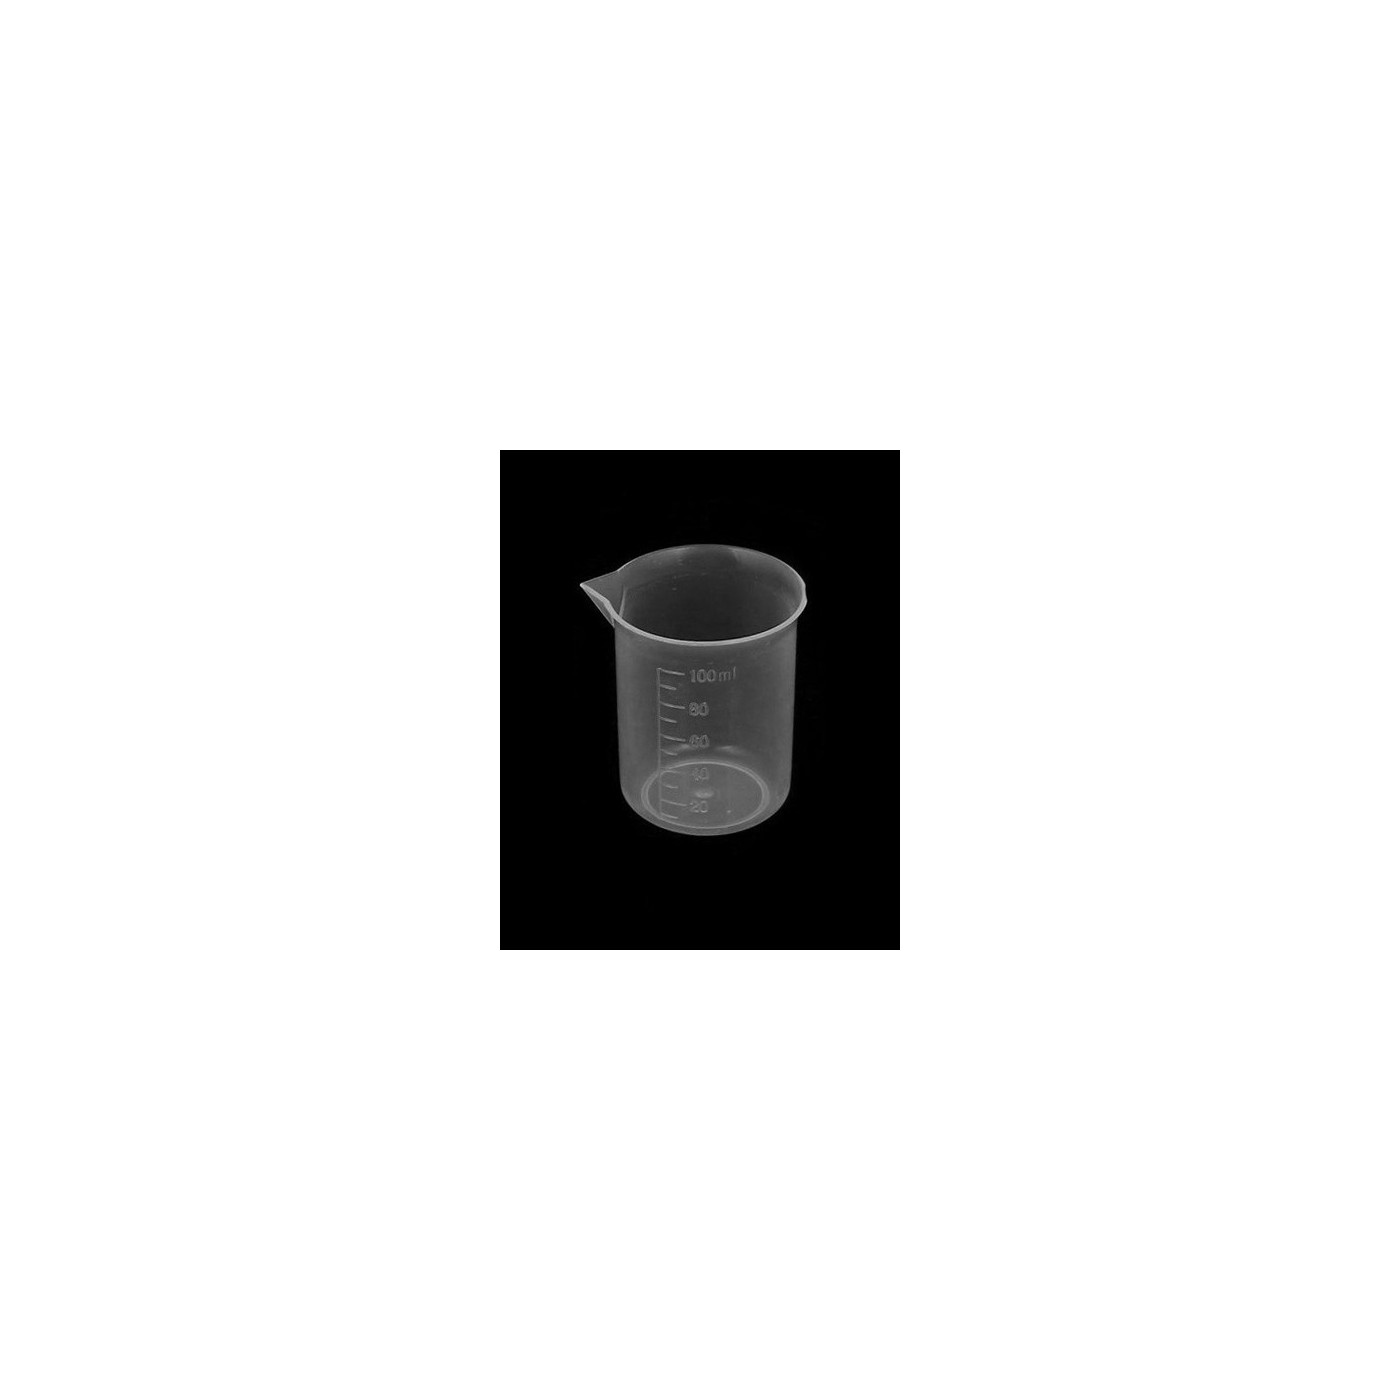 https://www.woodtoolsanddeco.com/4529-large_default/set-of-30-small-measuring-cups-100-ml-transparent-pp-for-frequent-use.jpg